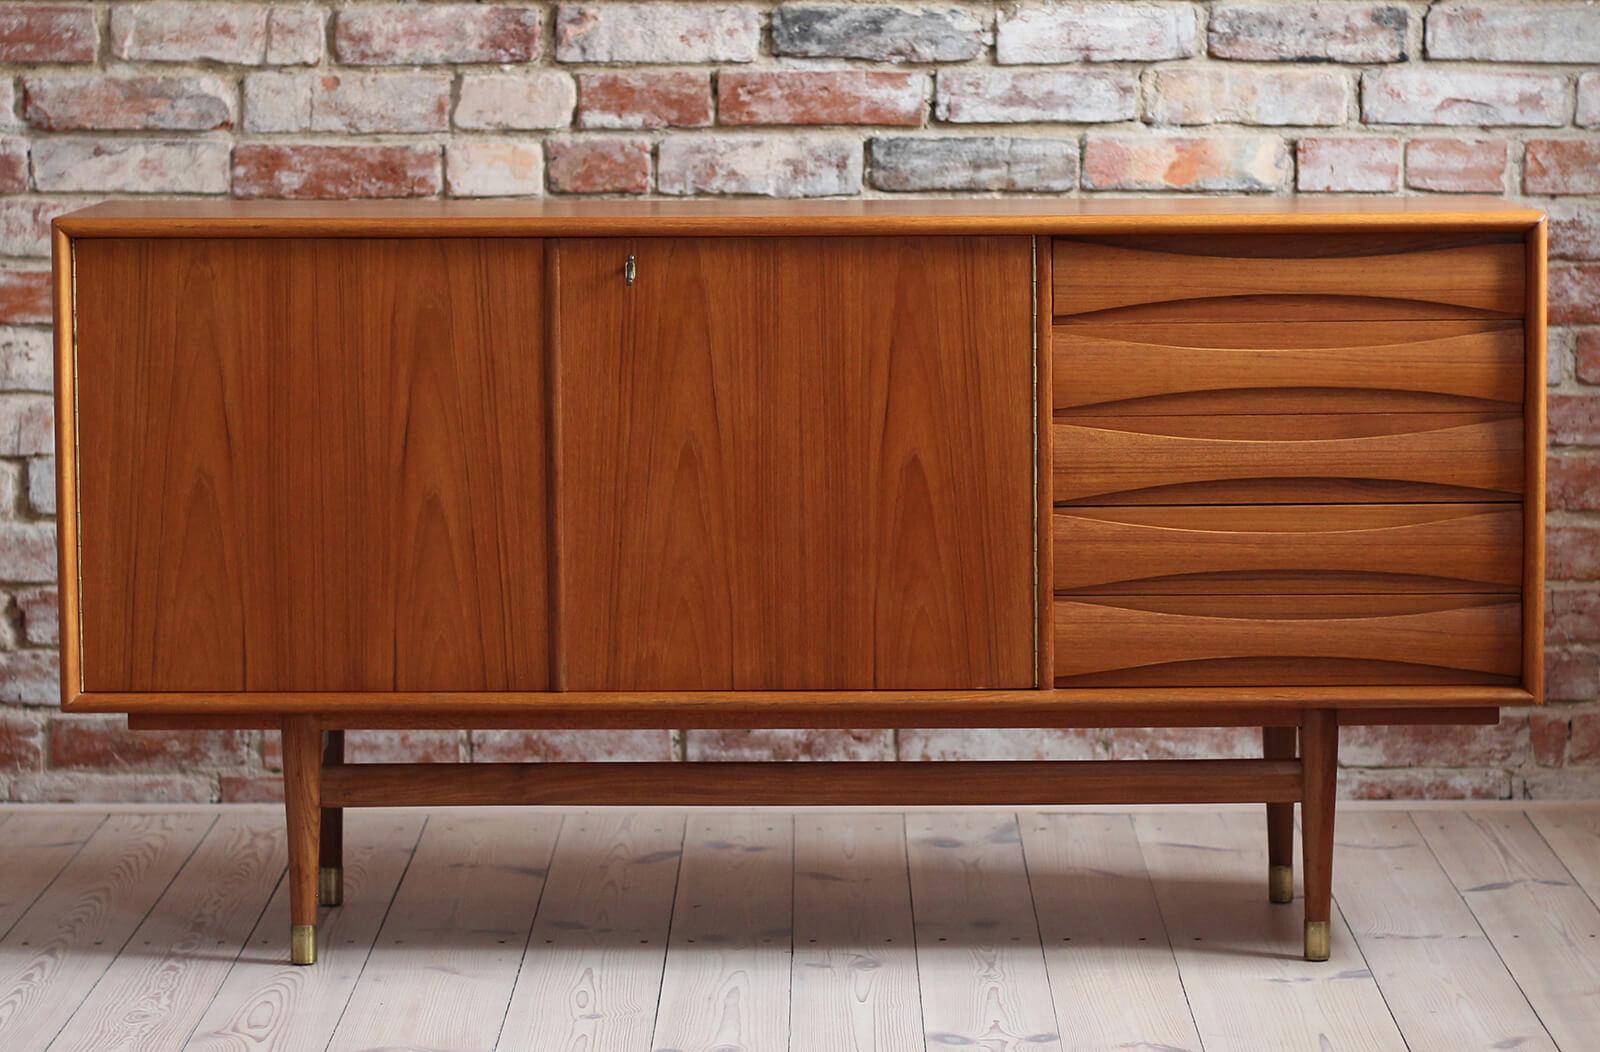 This is a quite rare Sven Andersen teak sideboard designed and manufactured in Norway around second half of 1950s. The piece features two doors that reveal lots of storage space and five drawers in the section on the right. The sideboard features